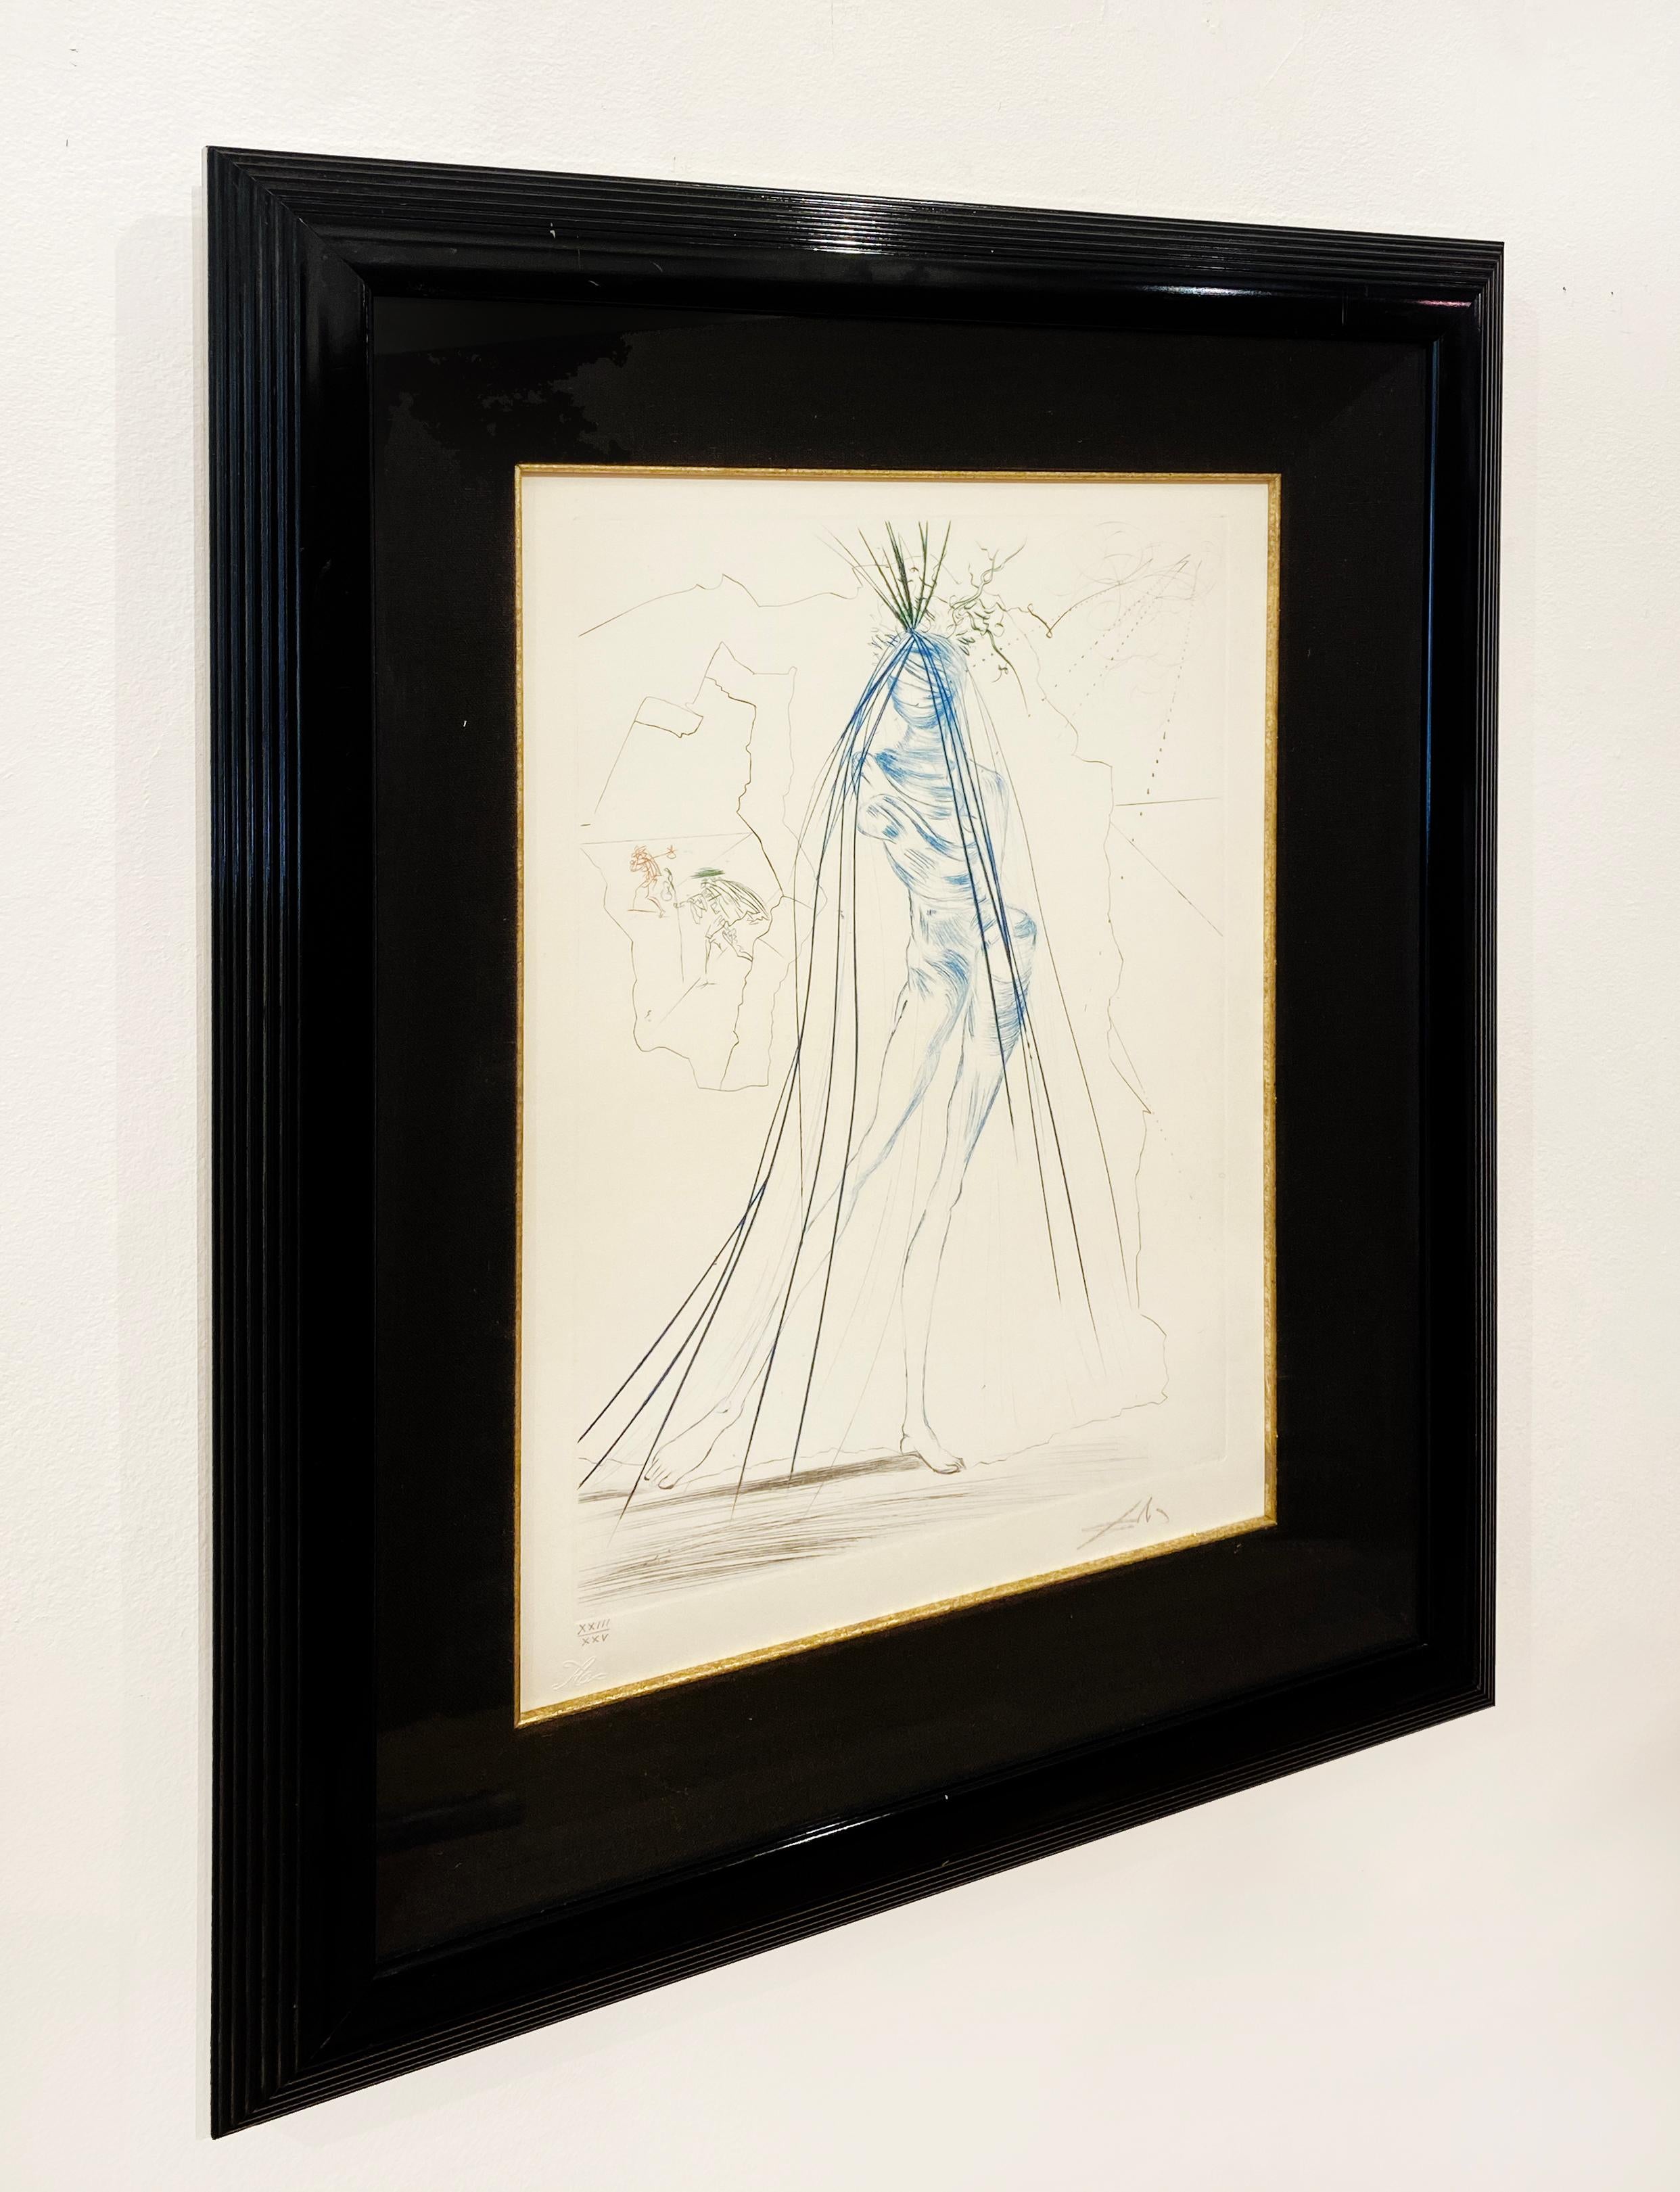 Iseult of the White Hands - Surrealist Print by Salvador Dalí